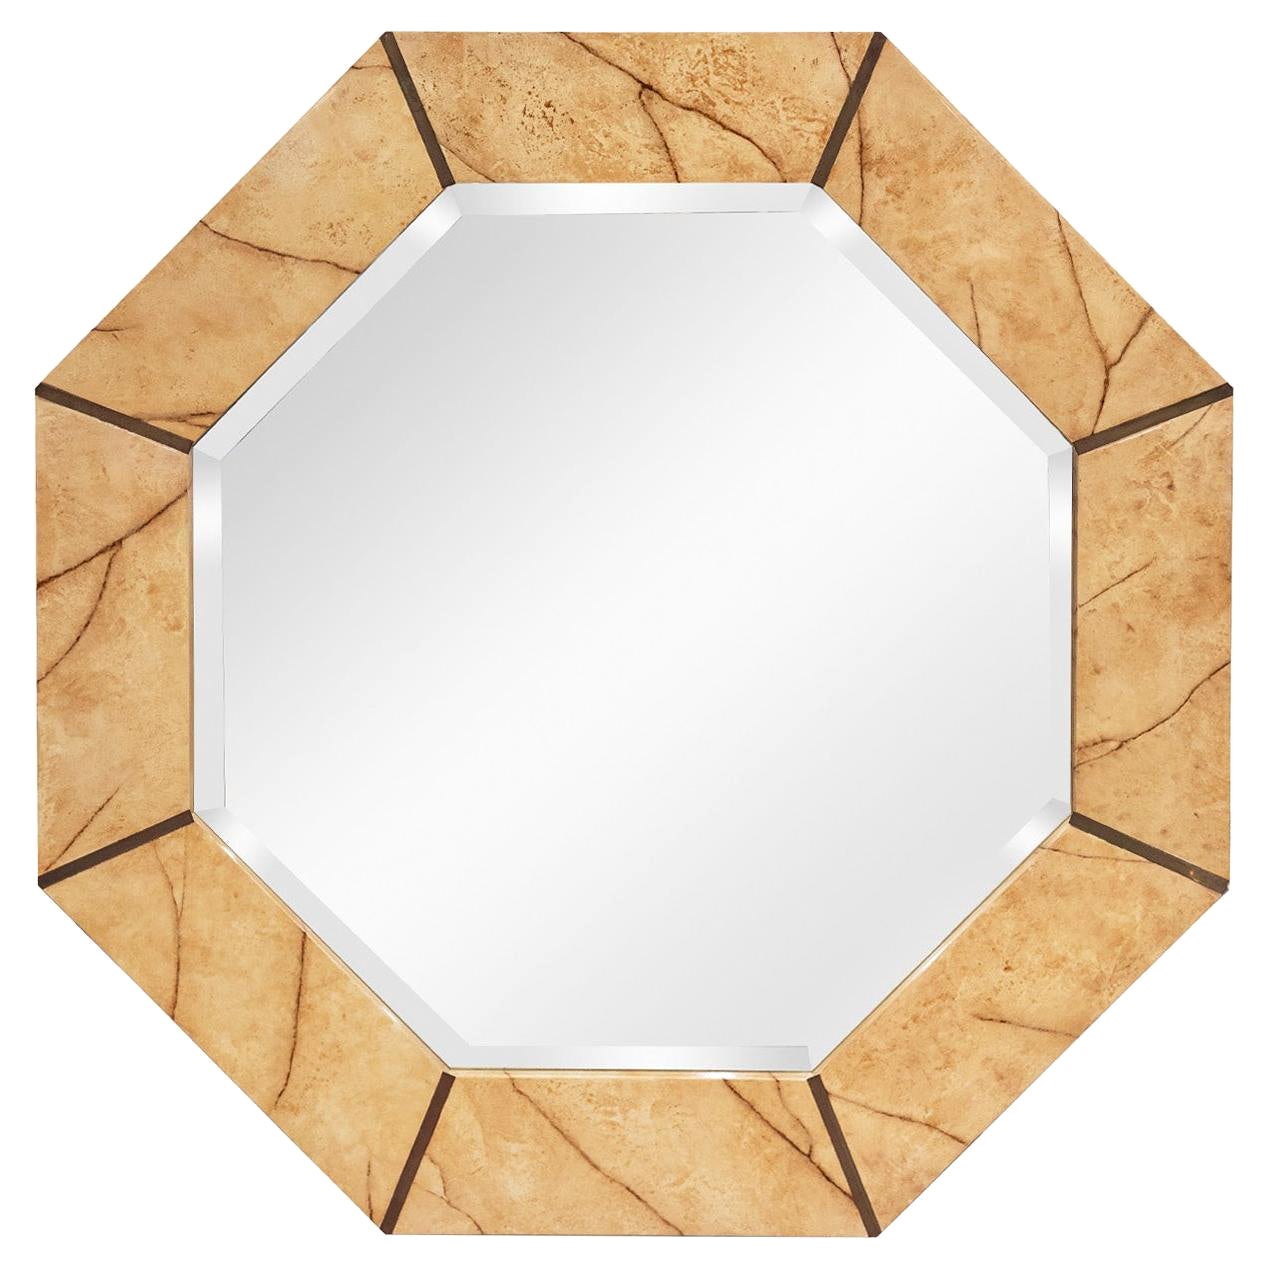 Karl Springer Octagonal Mirror with Superb Artisan Marble Lacquer, 1980s For Sale